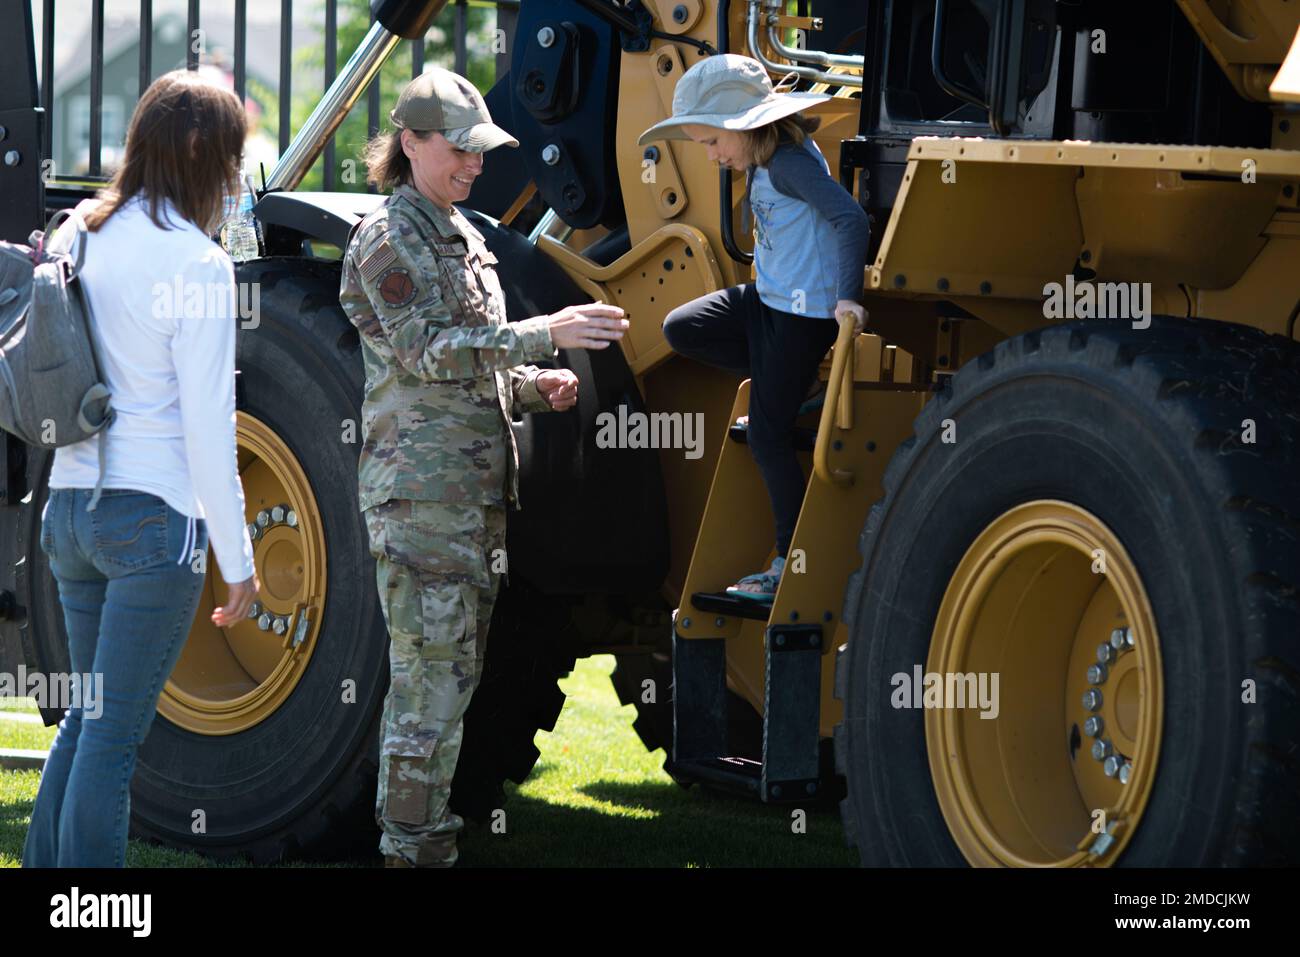 Tech. Sgt. Erin Harada 141 Civil Engineer Squadron helps a child down off a loader in Liberty Lake, Wash. July 15, 2022. The Airmen were out supporting the annual Touch-A-Truck event allowing both children and adults to check out heavy equipment from multiple agencies. Stock Photo